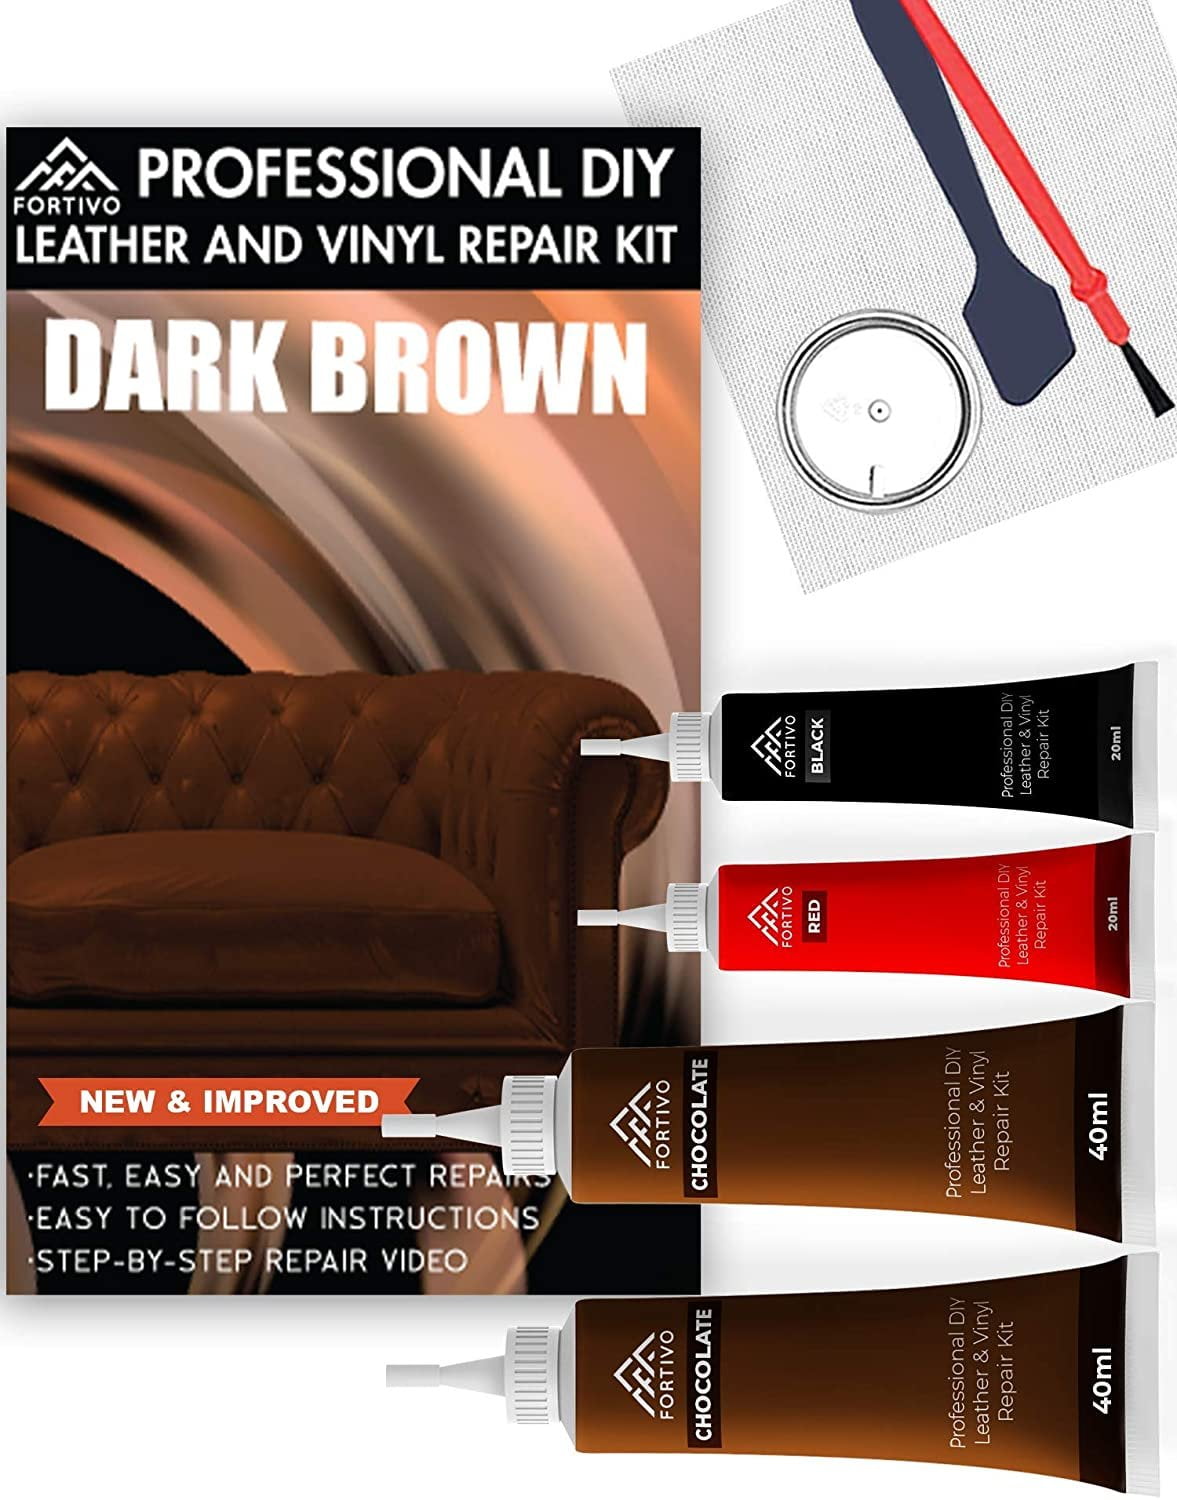 Leather Repair Kits for Couches Dark Brown, Leather Repair Kit for Couch  Leather Refurbishing - Leather Restorer Vinyl Repair Kit - Leather Scratch  Repair for Couch, Boat Seats - Leather Dye Brown 